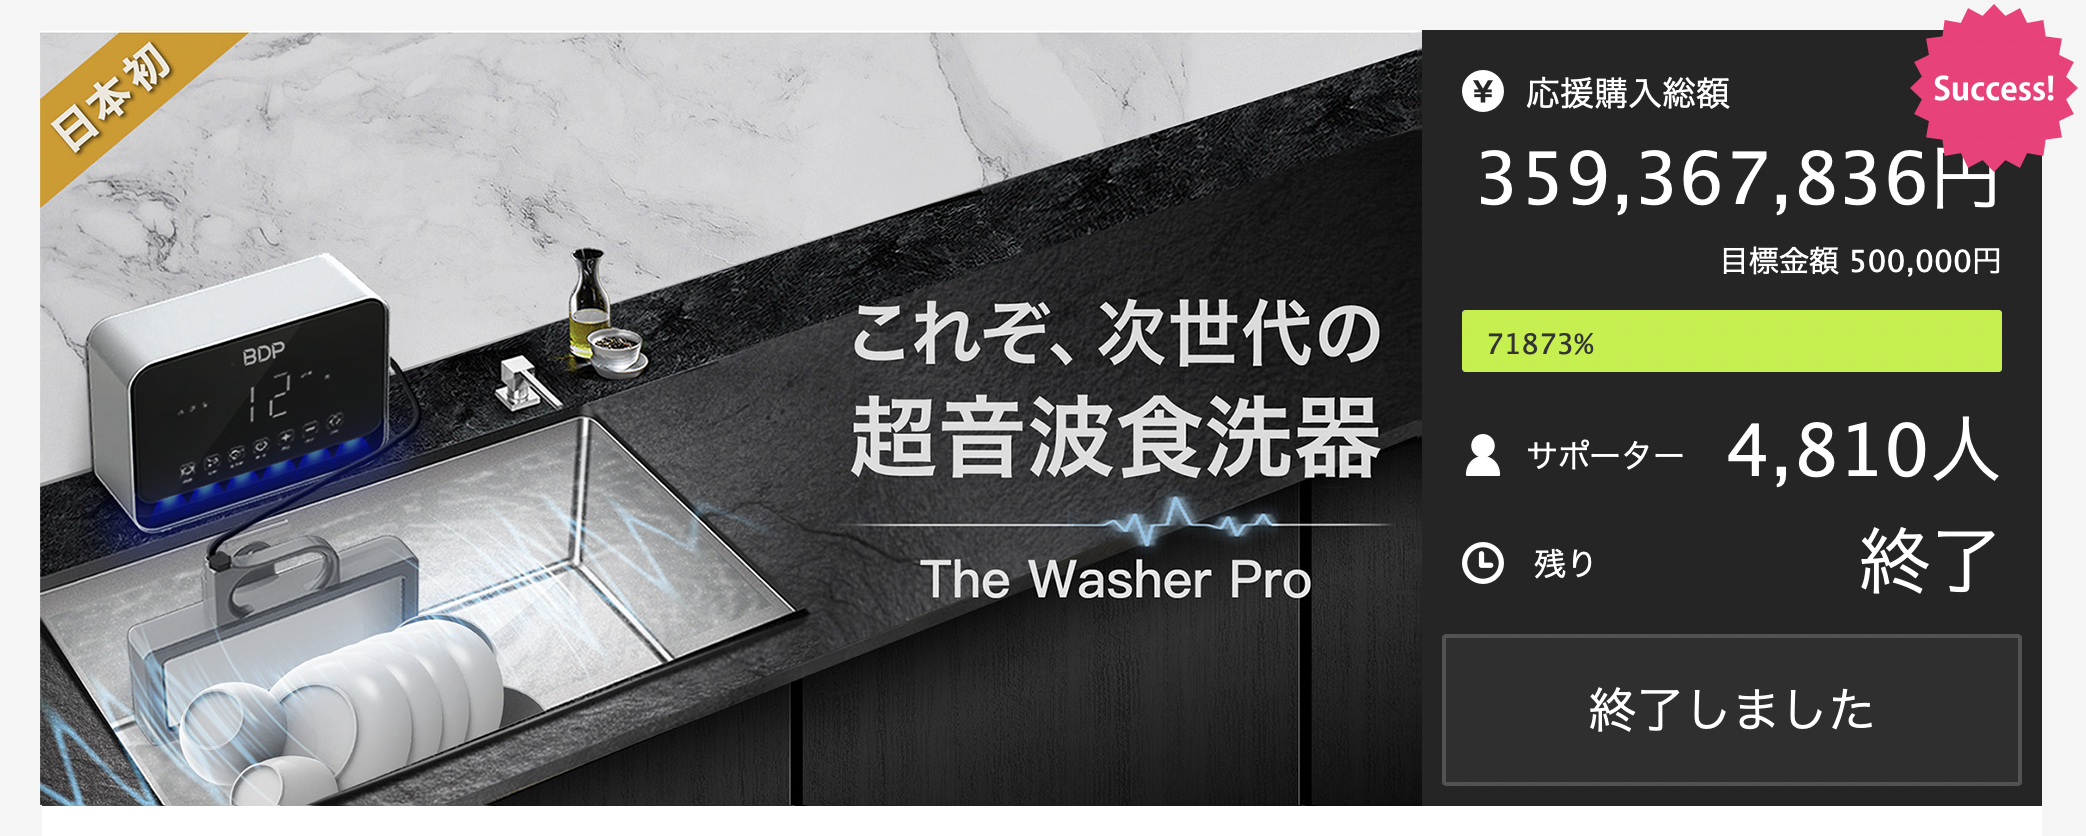 BDP　食洗機　The Washer Pro